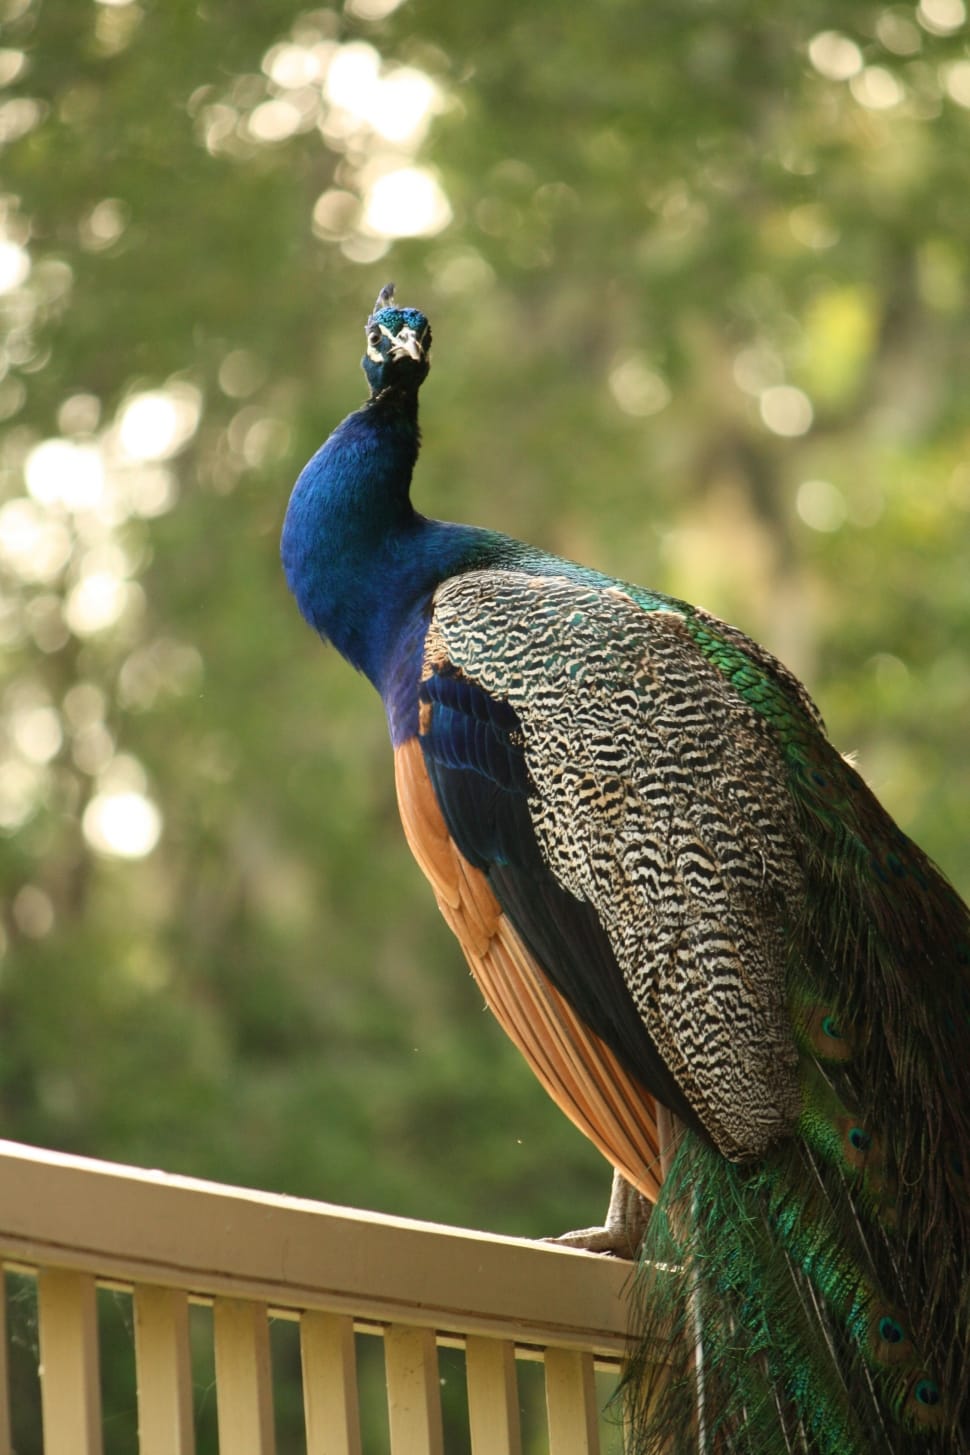 Peacock standing on brown wooden railings preview